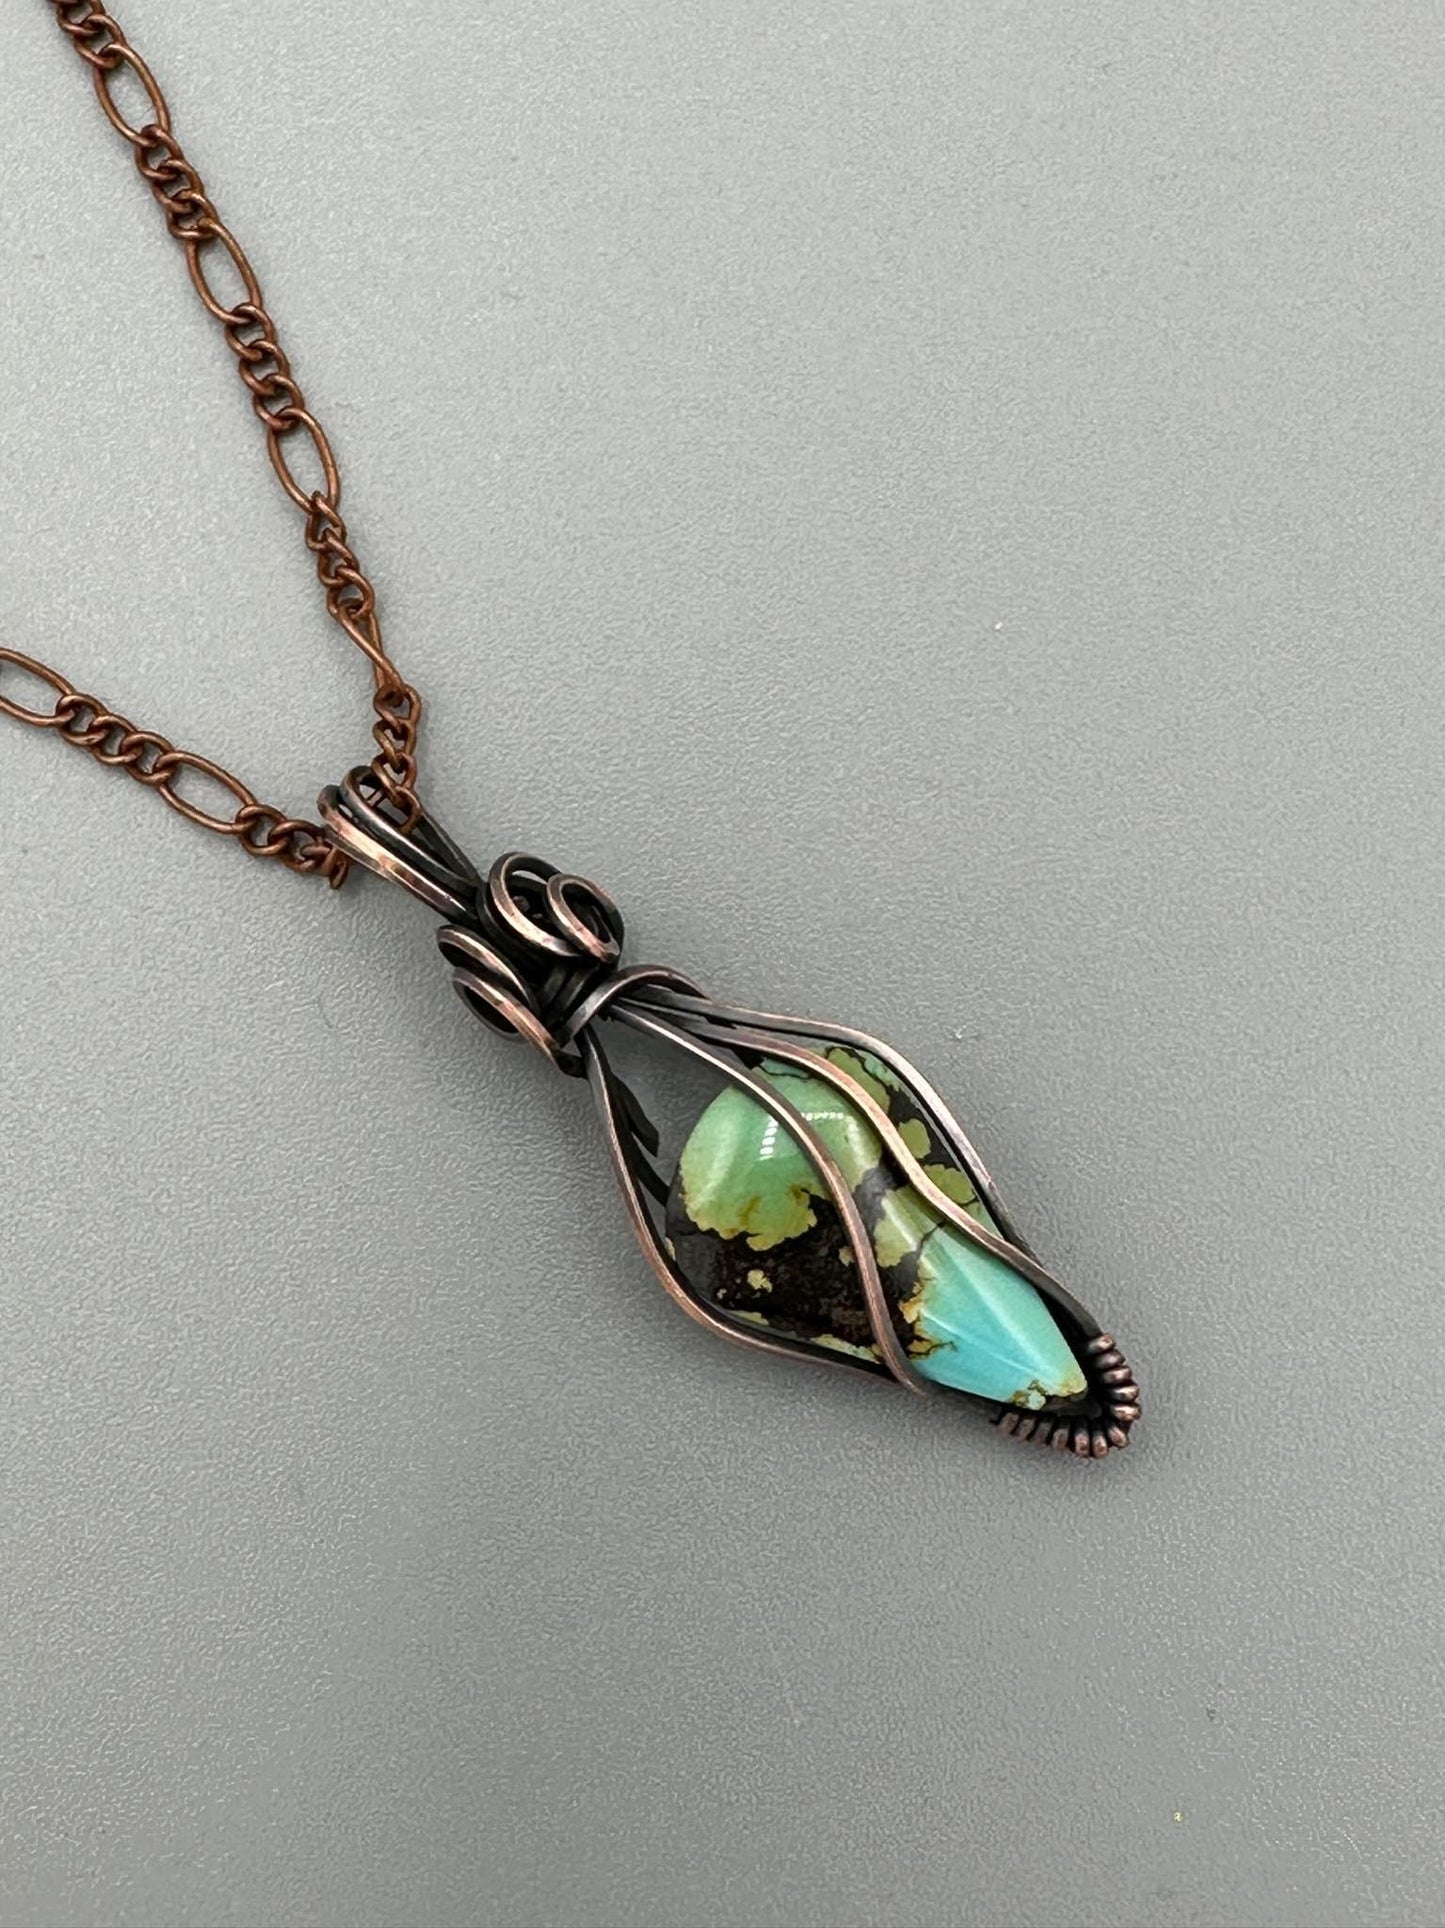 Handmade Wire Wrapped Turquoise Teardrop